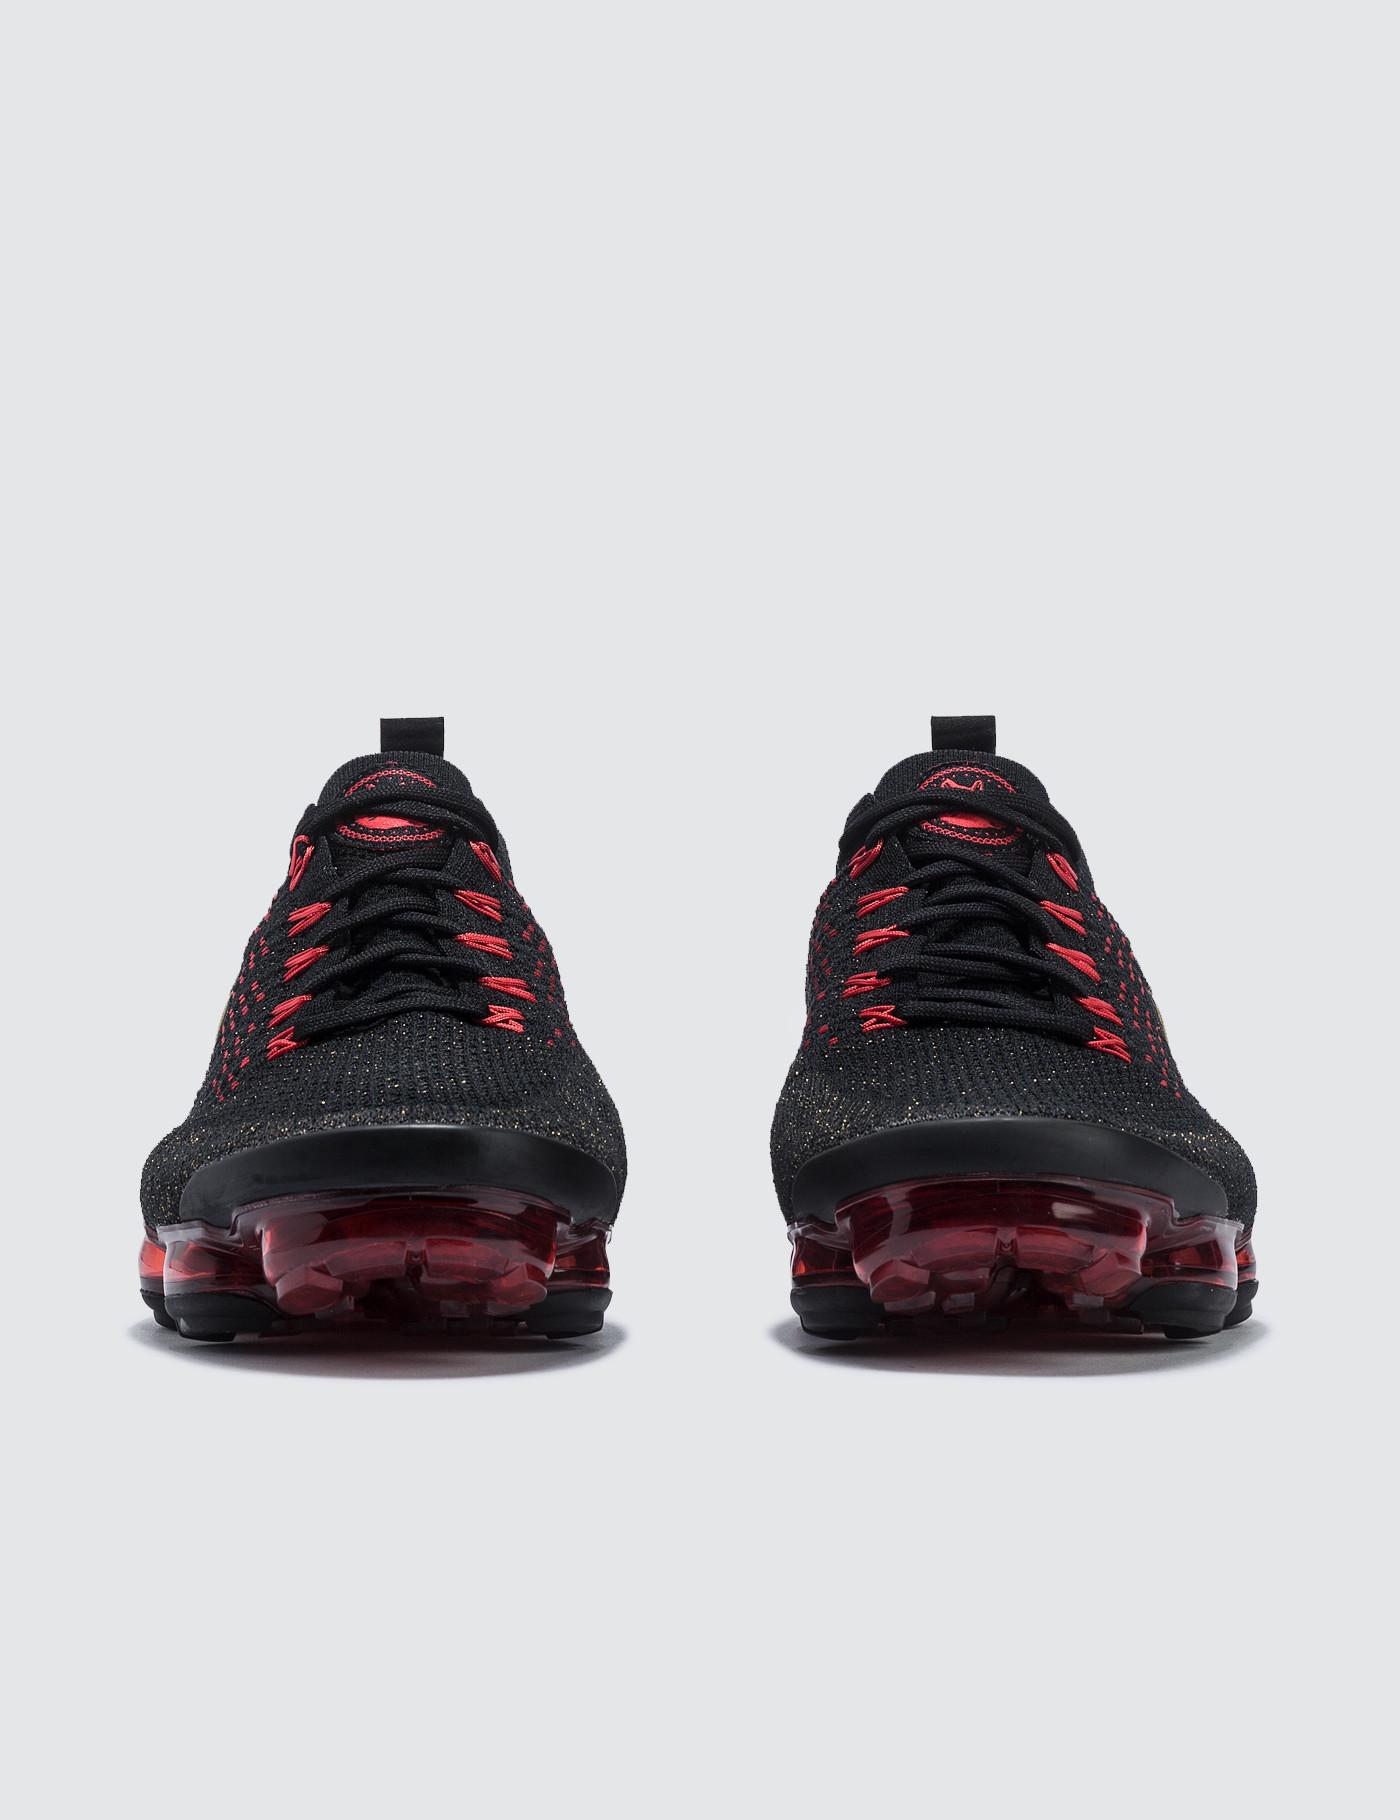 vapormax flyknit 2 chinese new year, Off 68%, www.scrimaglio.com